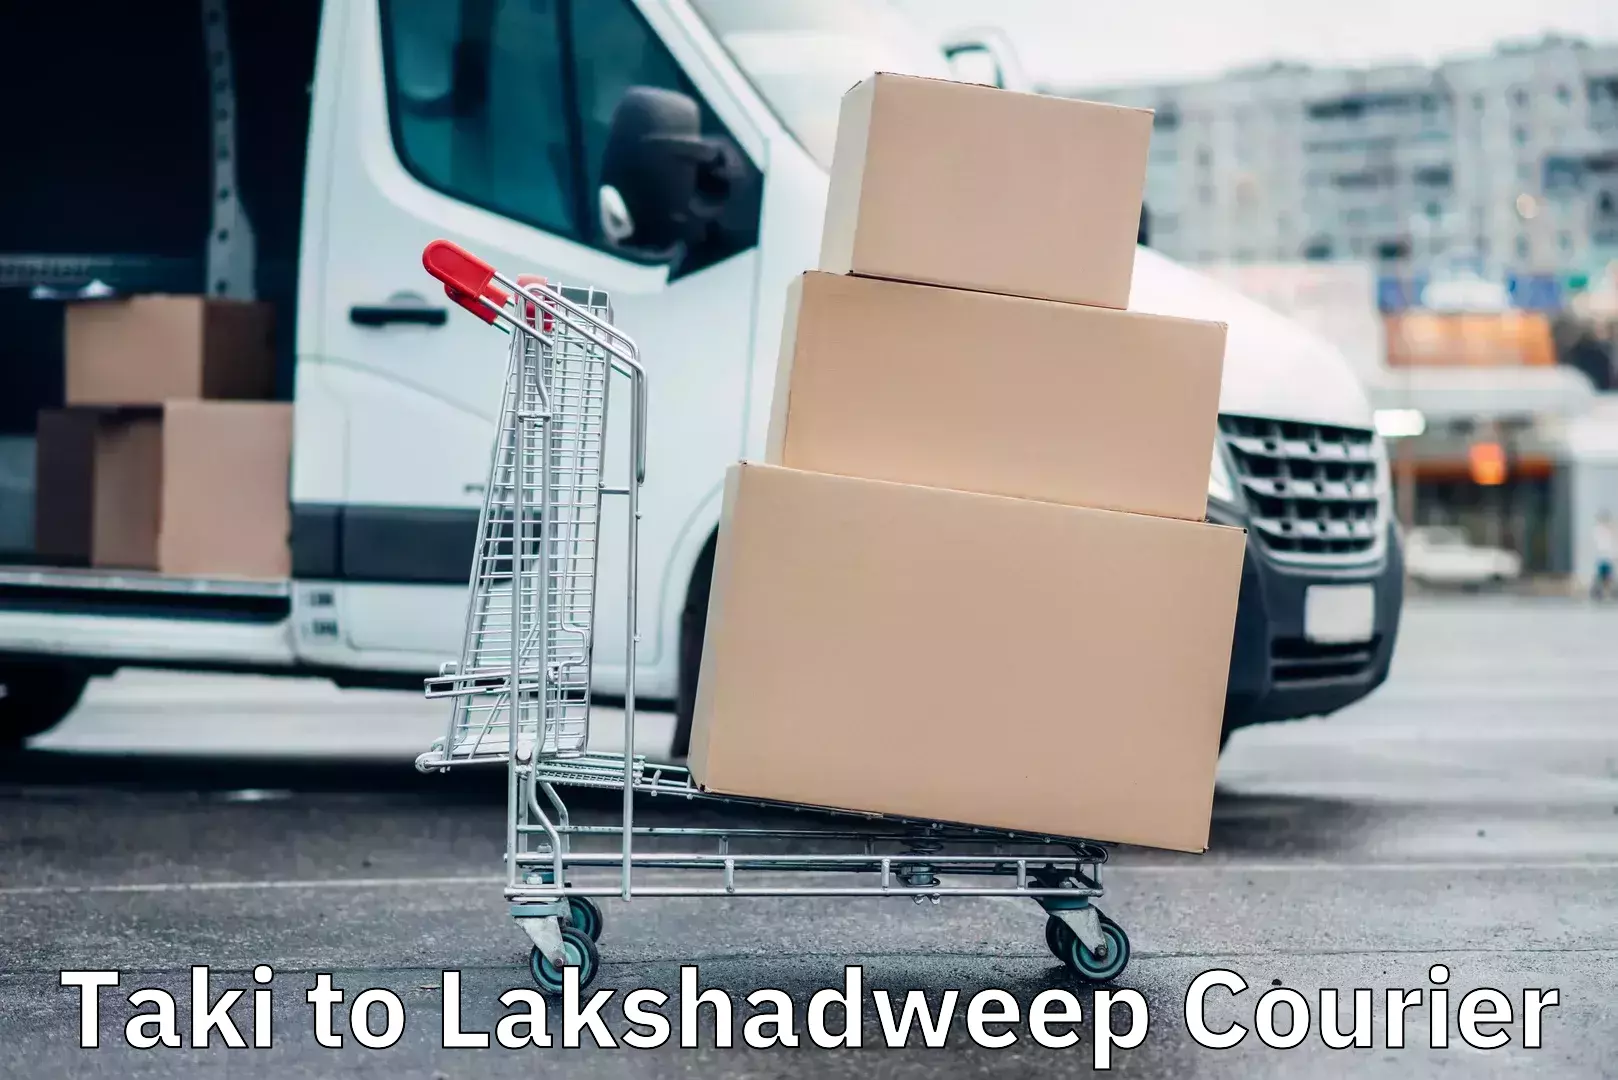 On-call courier service Taki to Lakshadweep